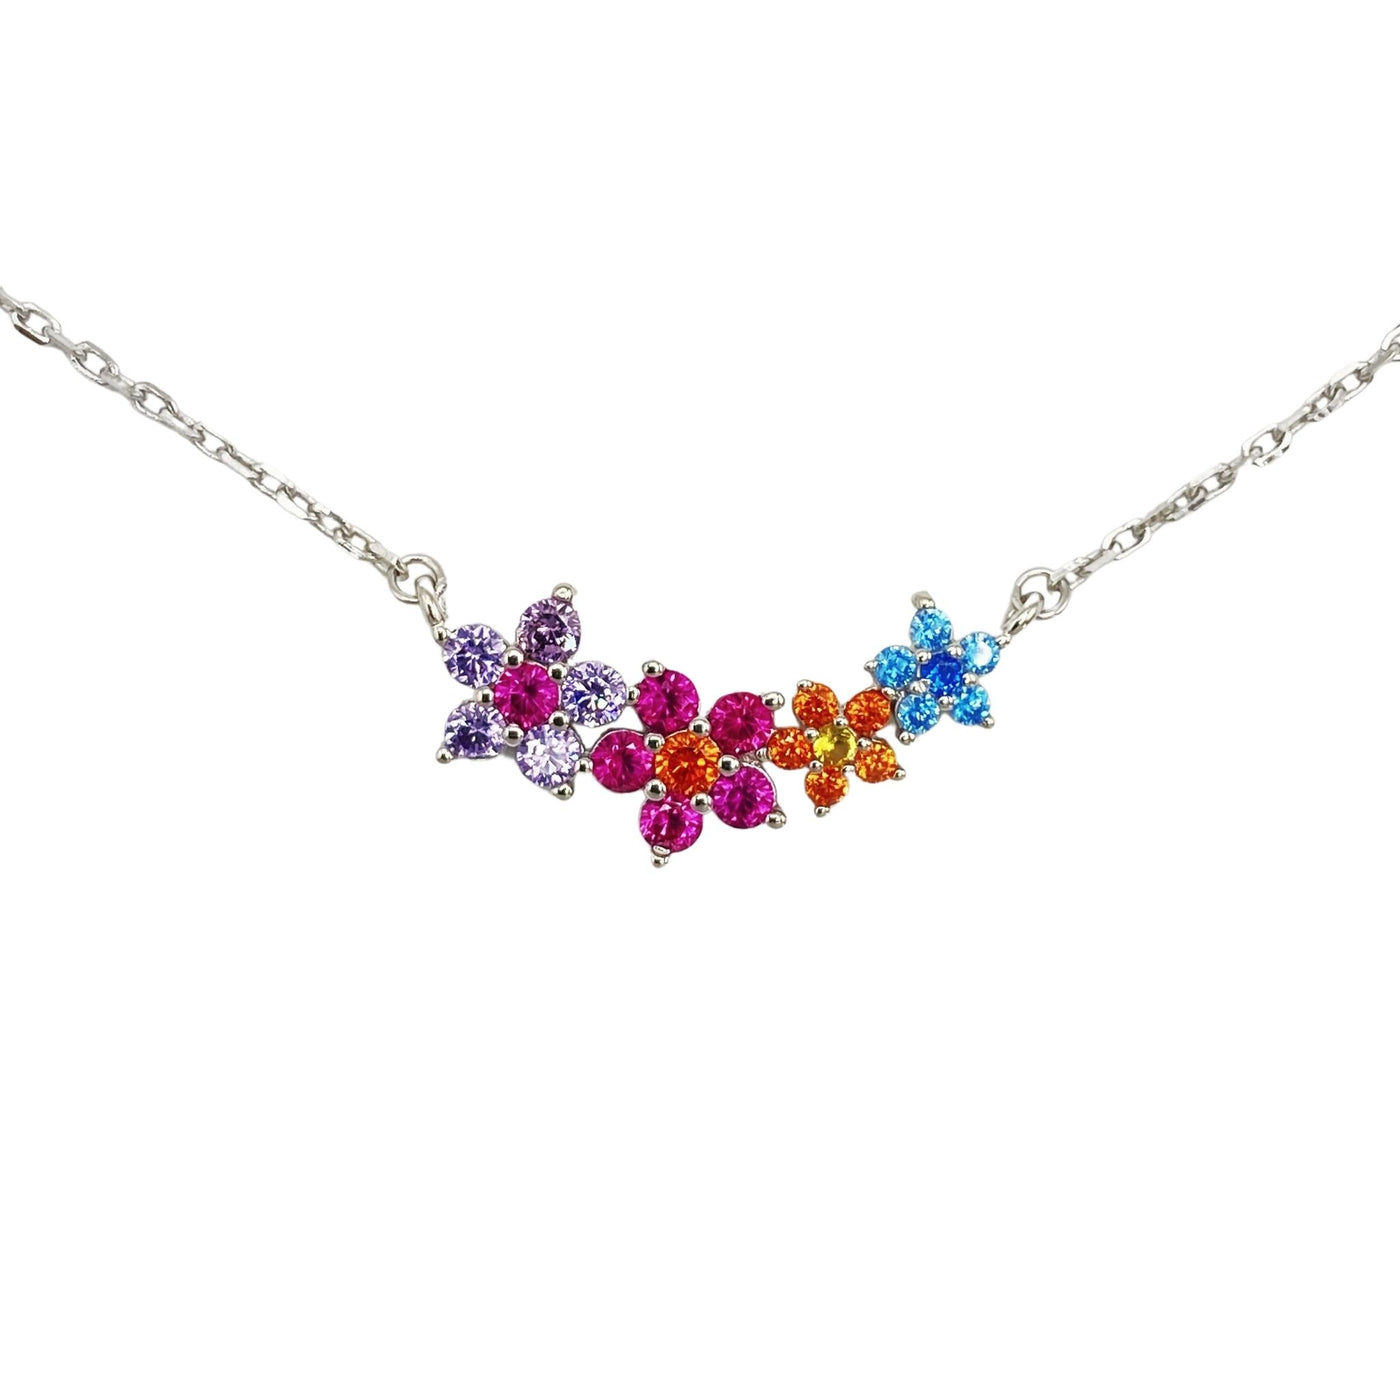 Silver necklace with central 4 flowers